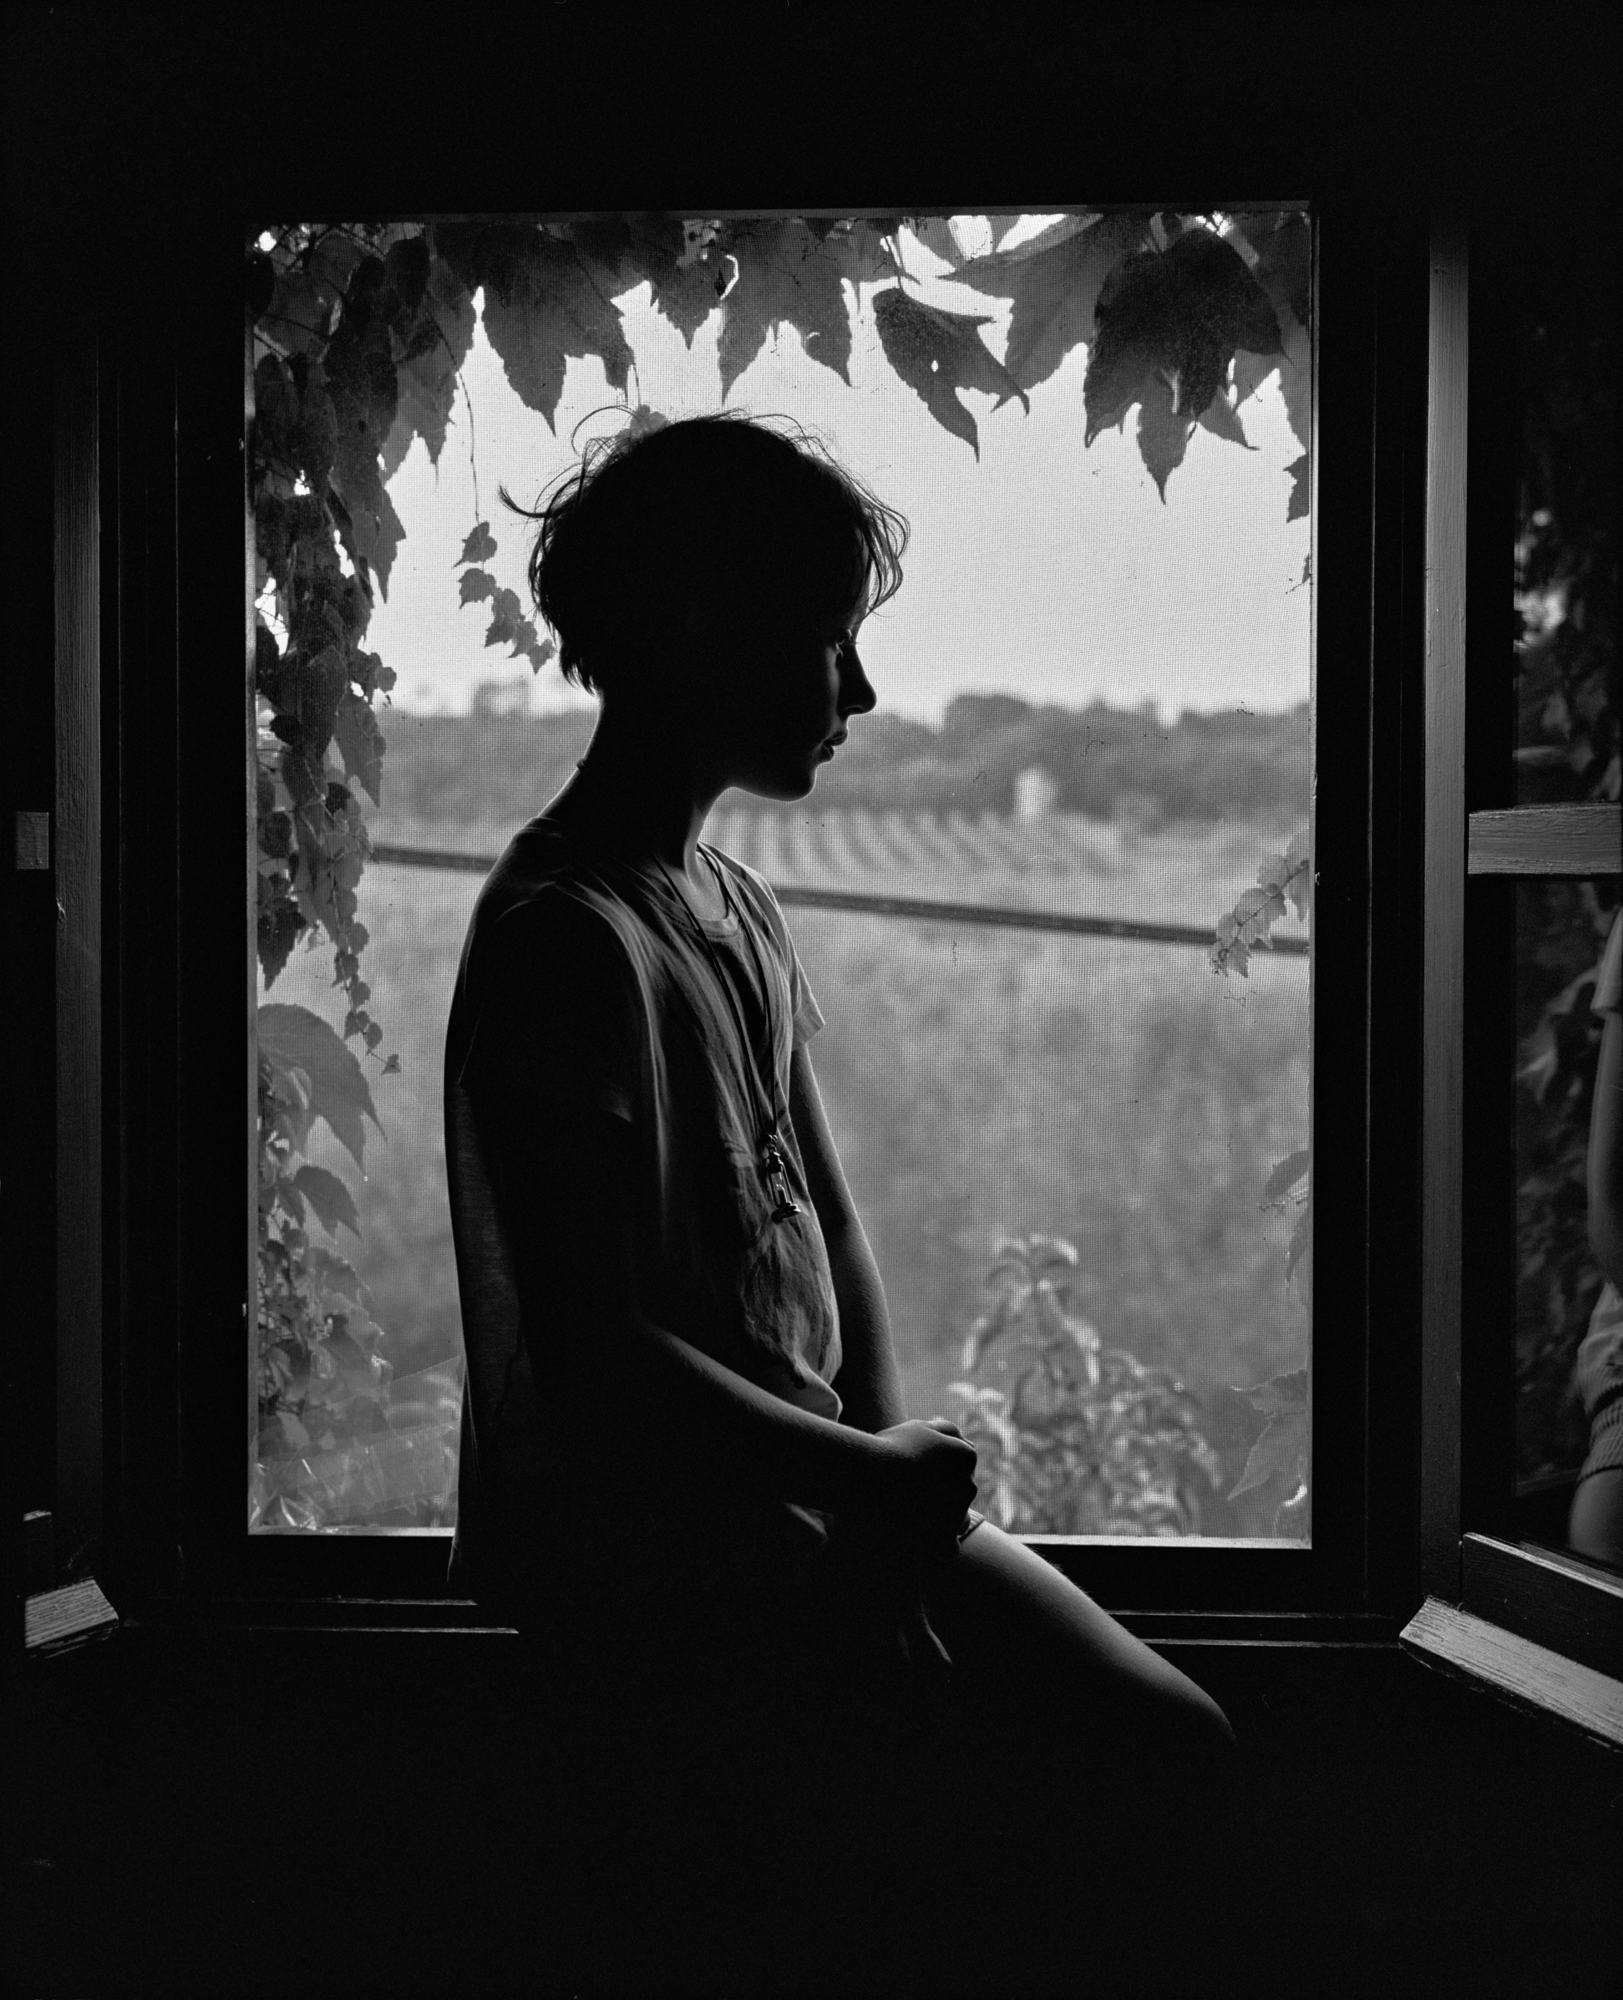 Black and white photograph of child sitting in window sill